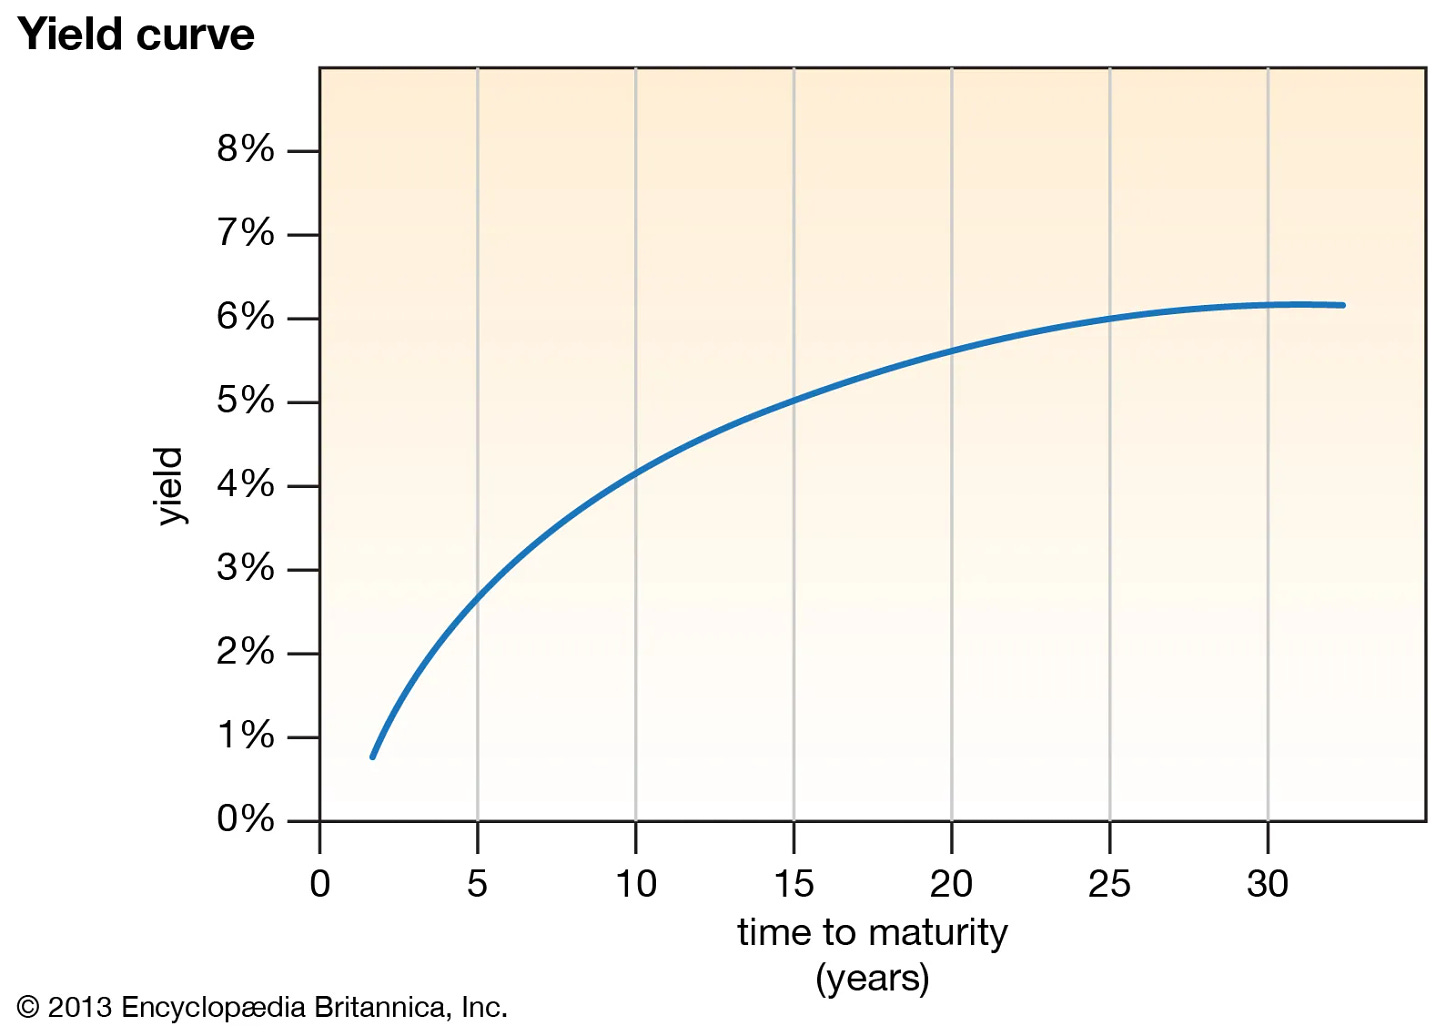 Yield curve example